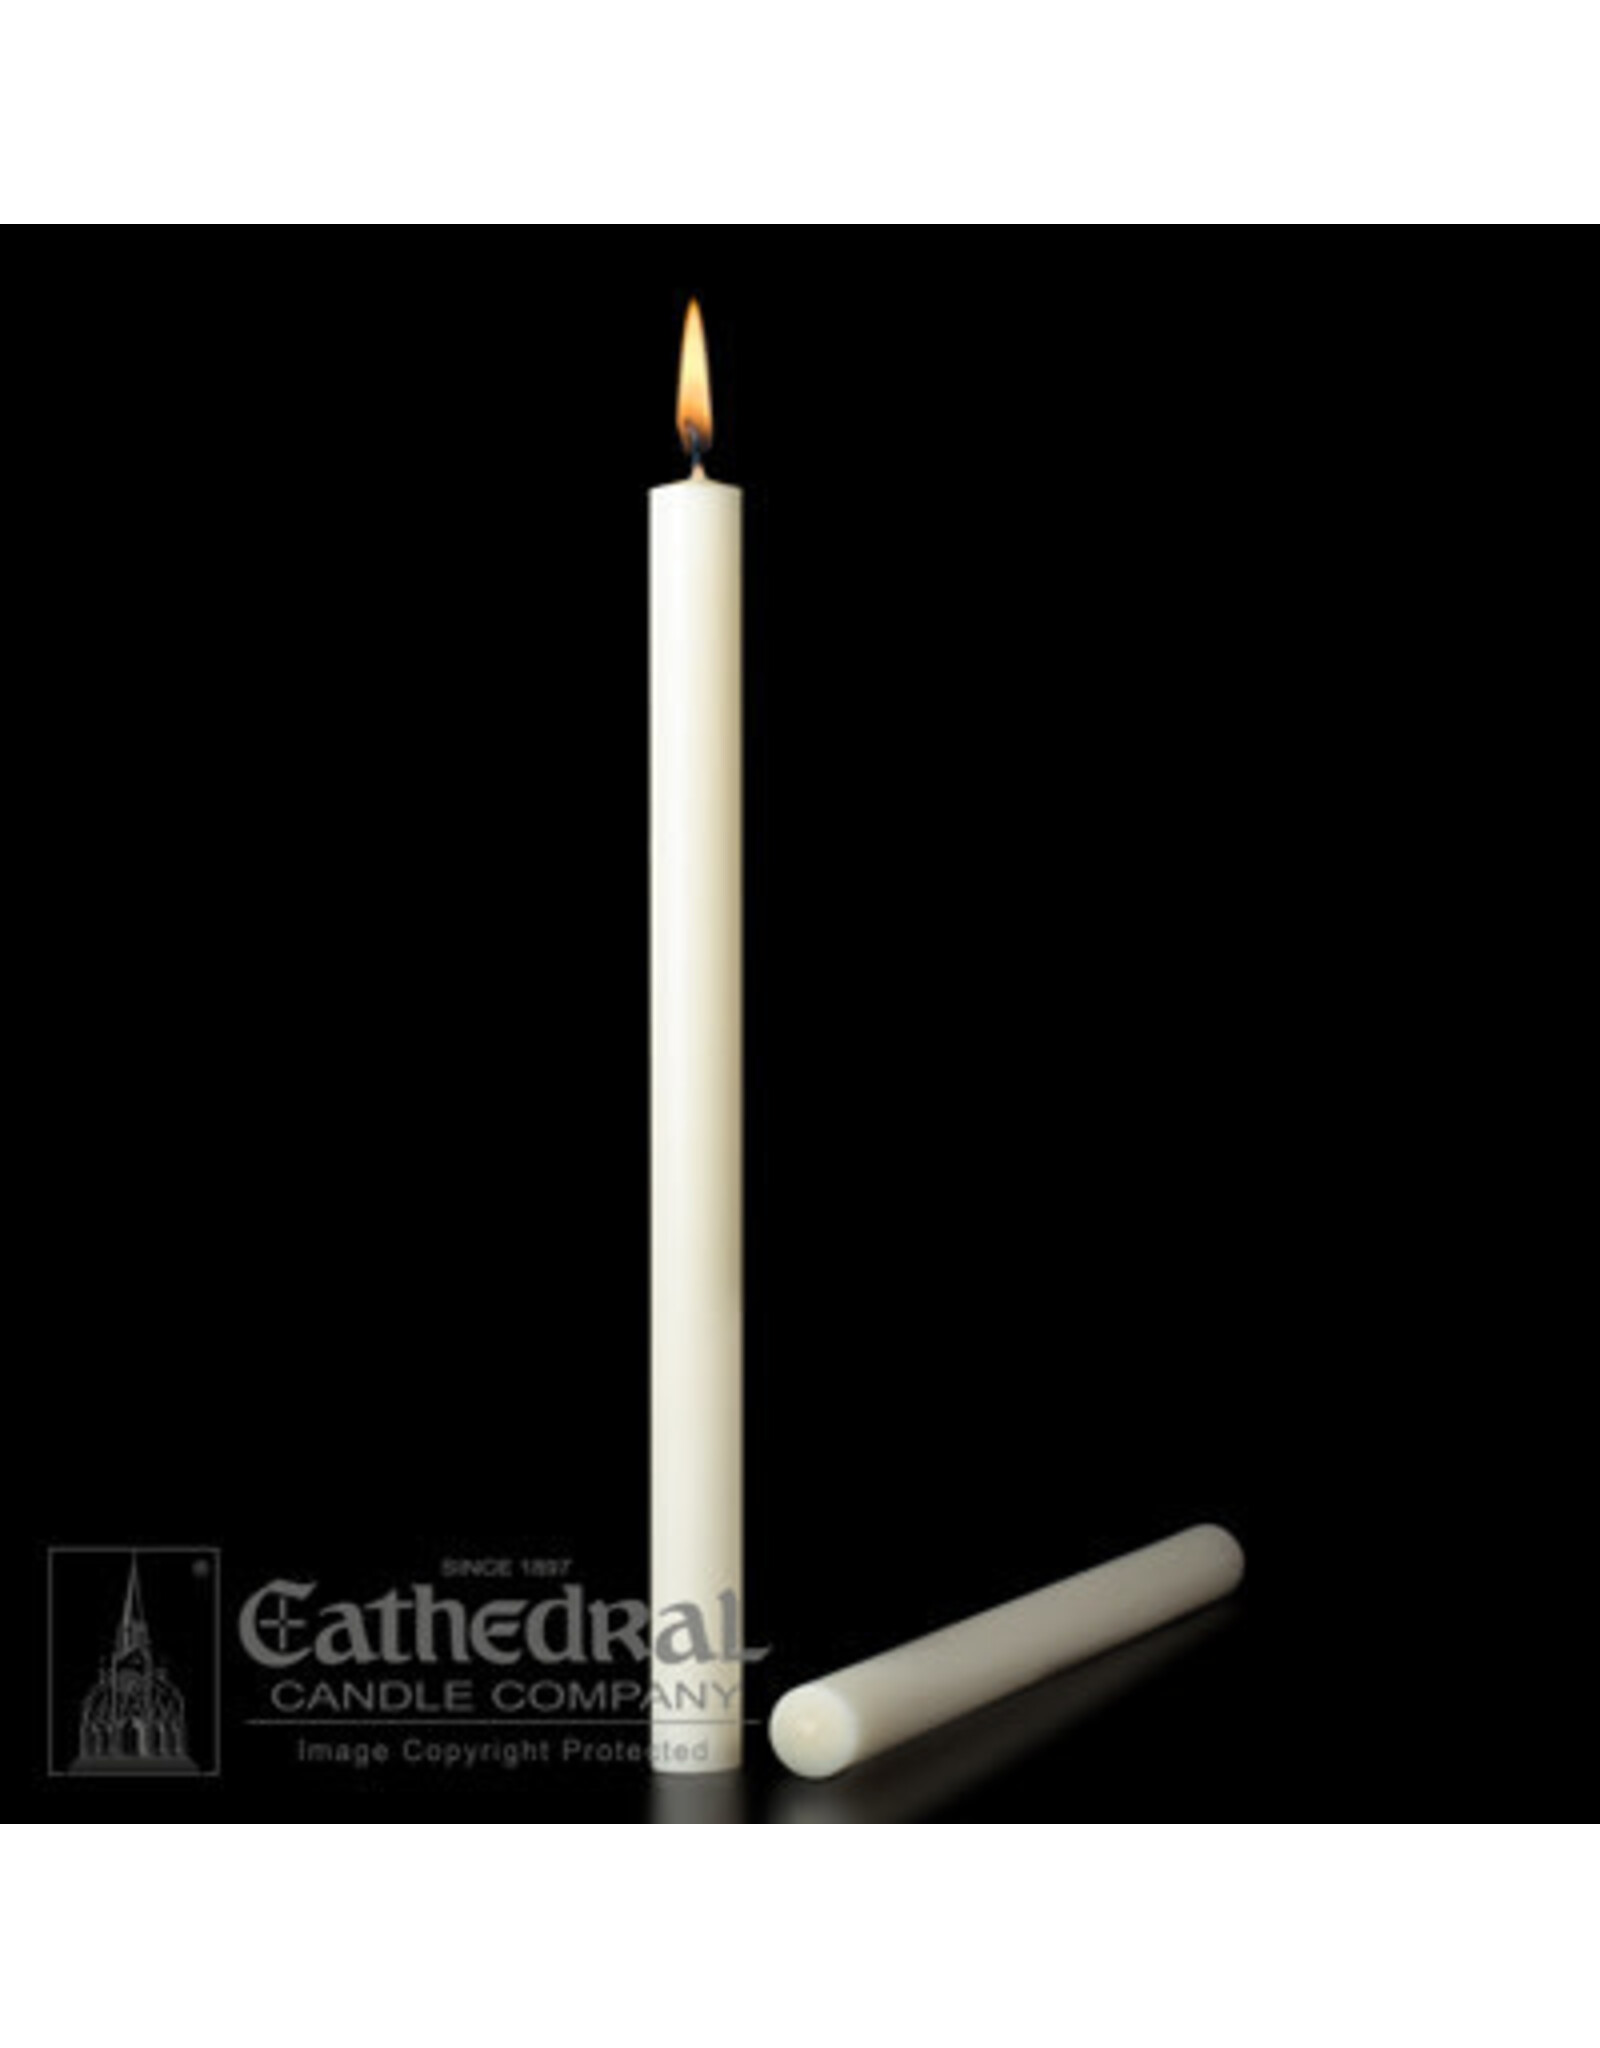 Cathedral Candle 51% Beeswax Altar Candles 1.5"x26" PE (12)